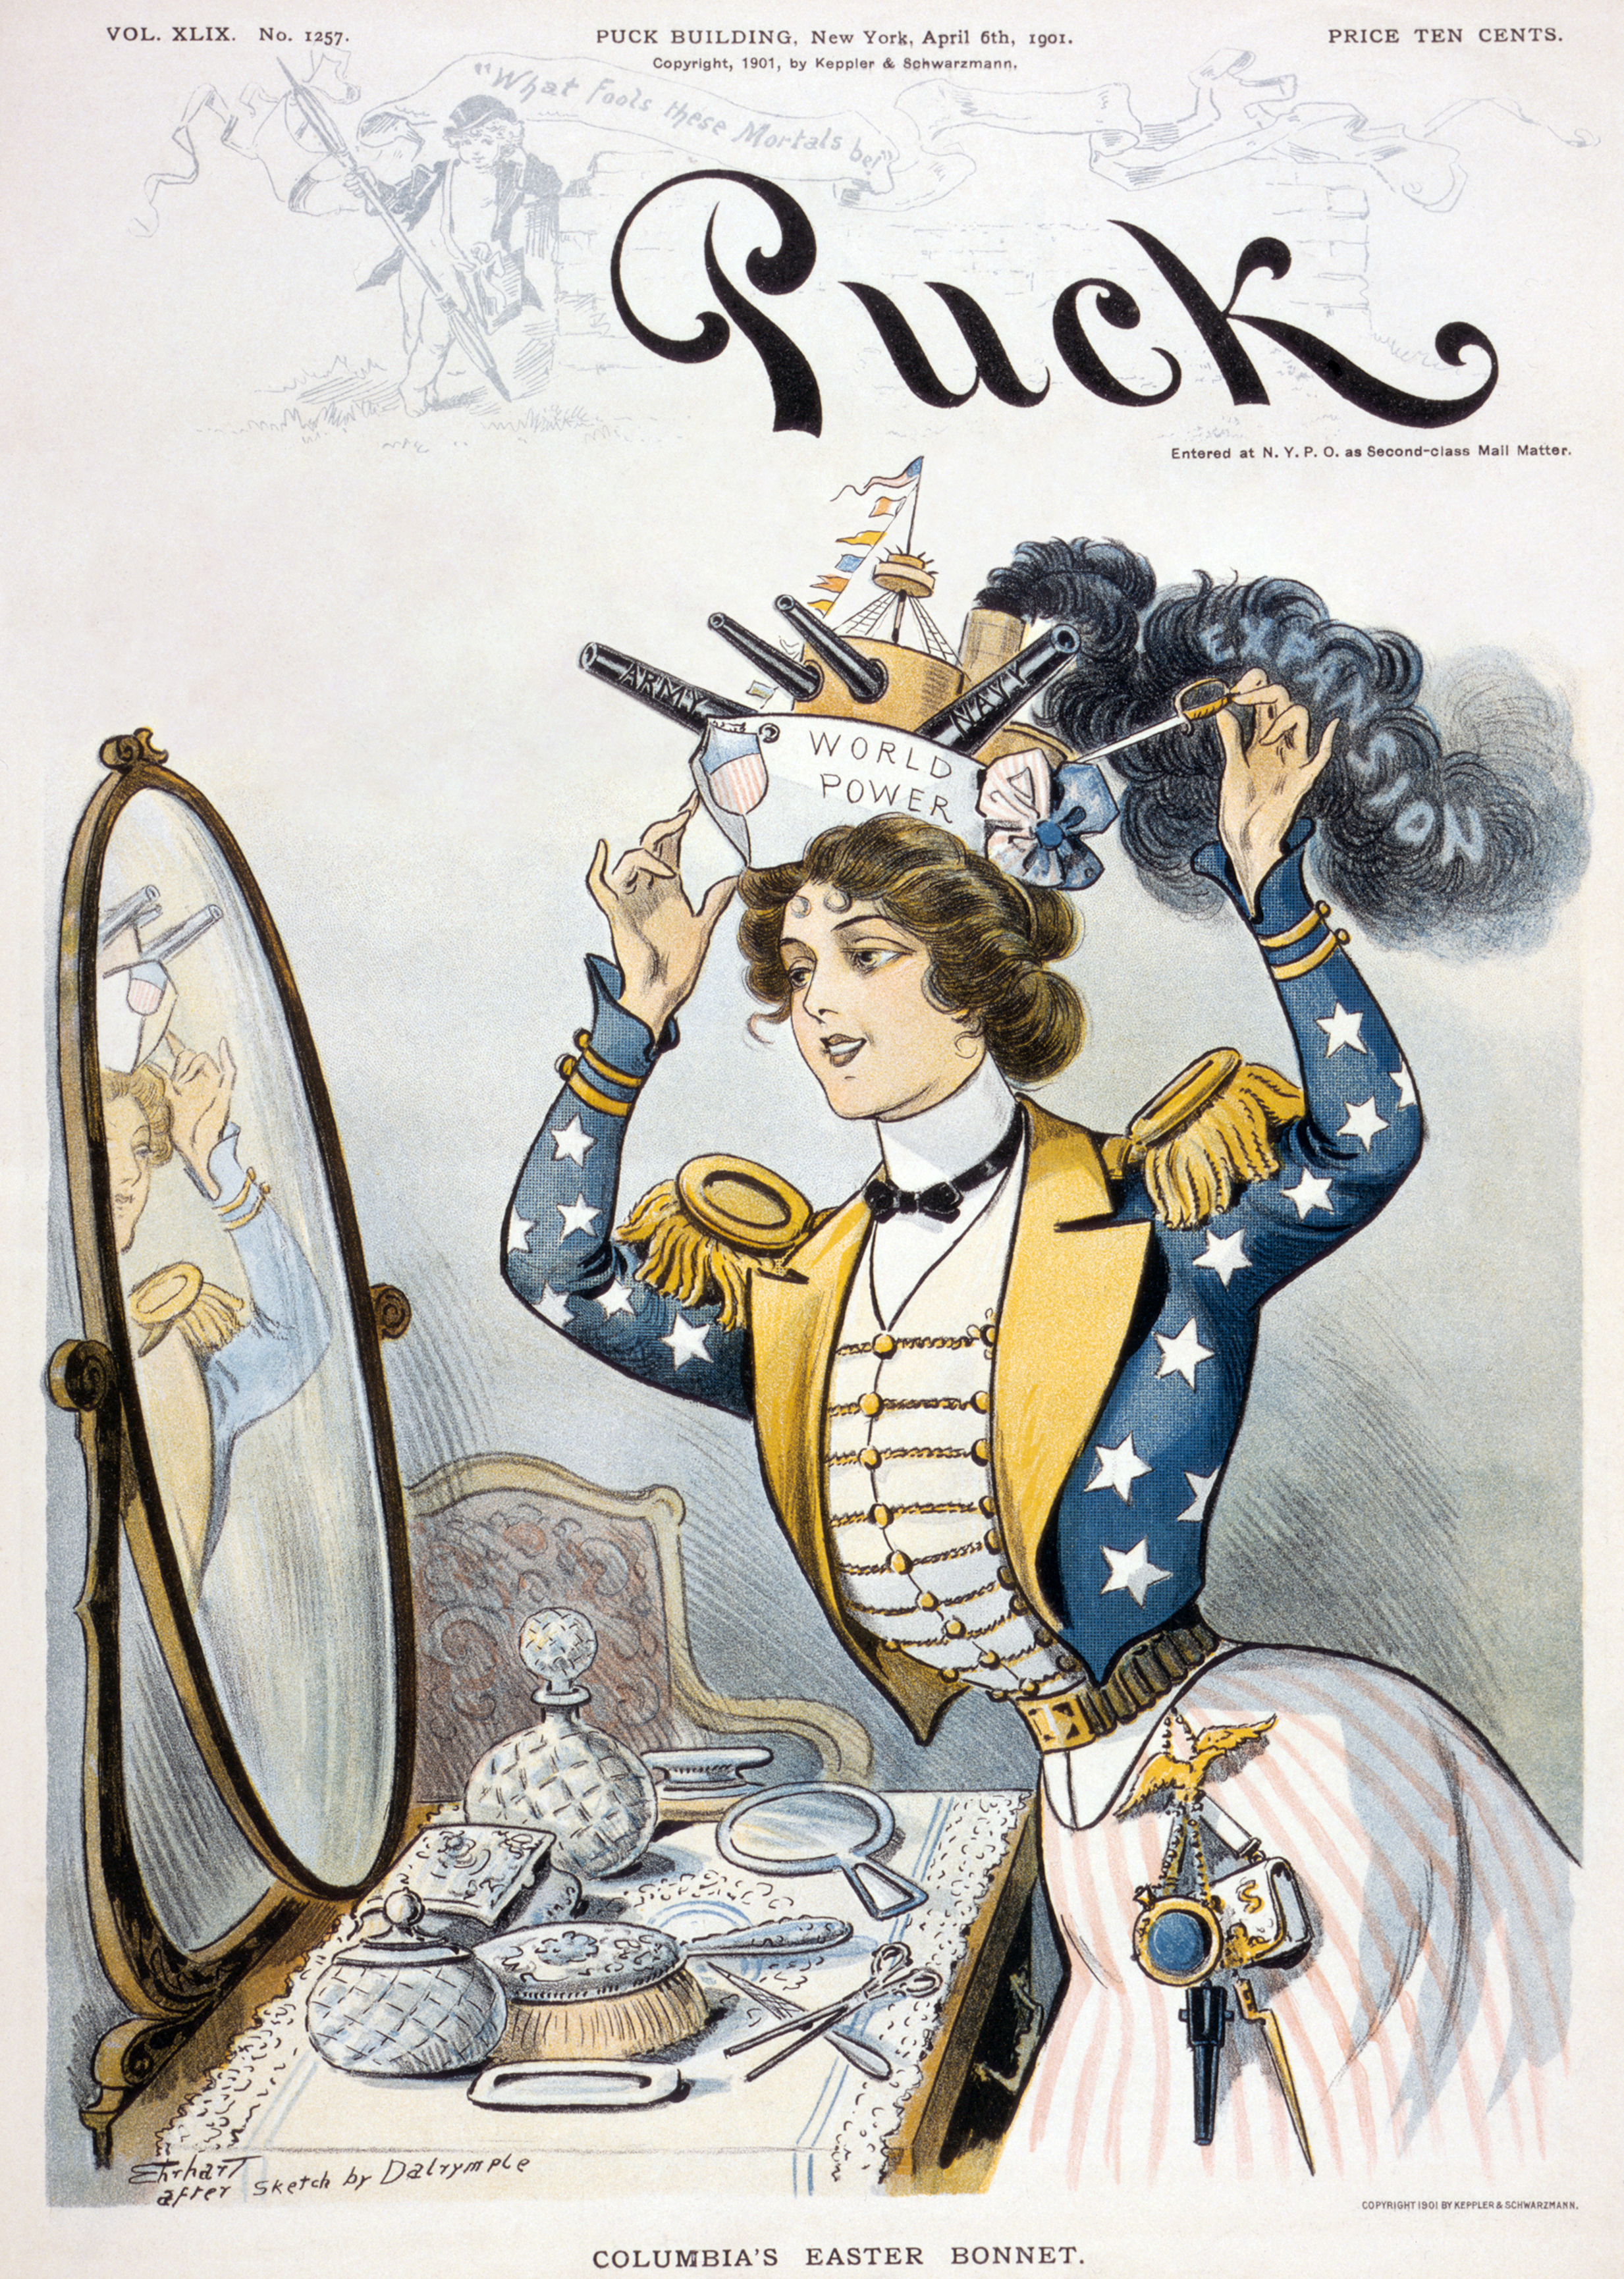 The 1901 cover of Puck, a satirical magazine.